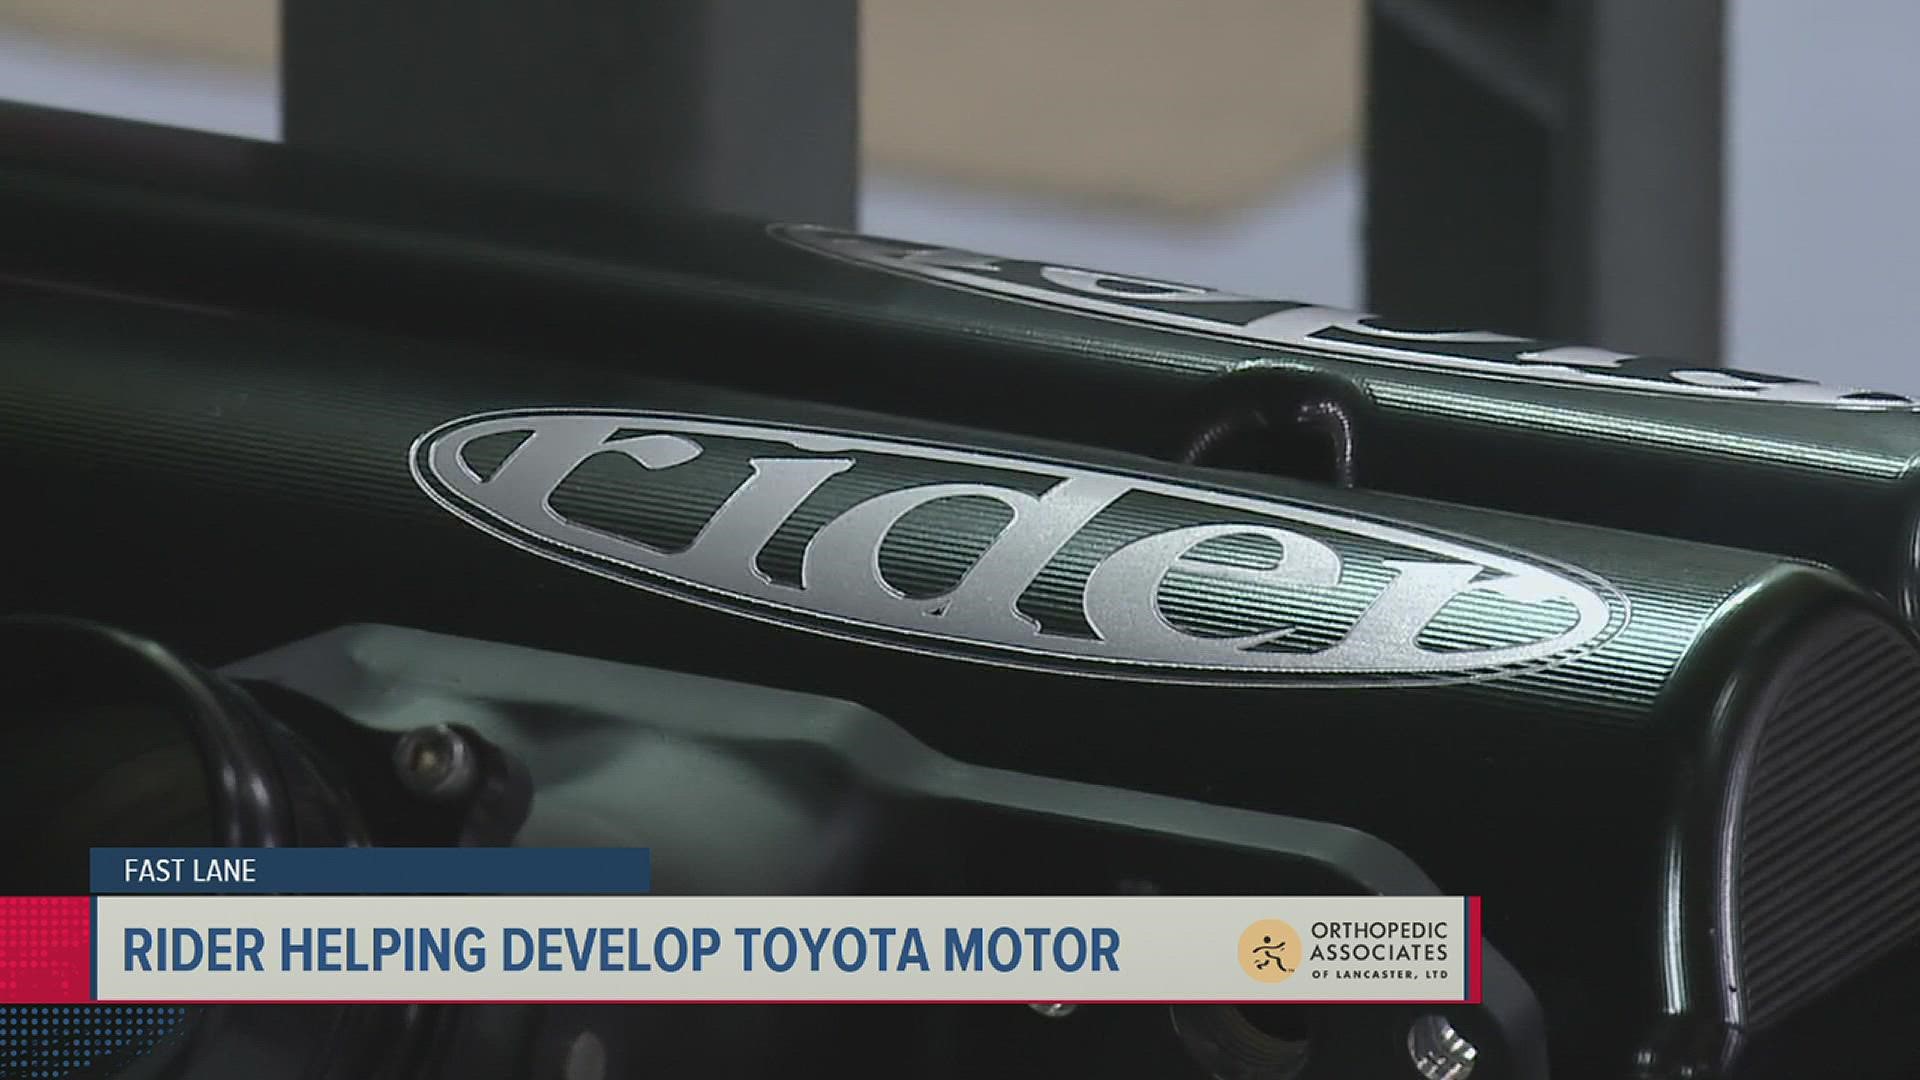 The Central PA based company just one of two engine builders in the country helping to develop the Toyota sprint car motor.